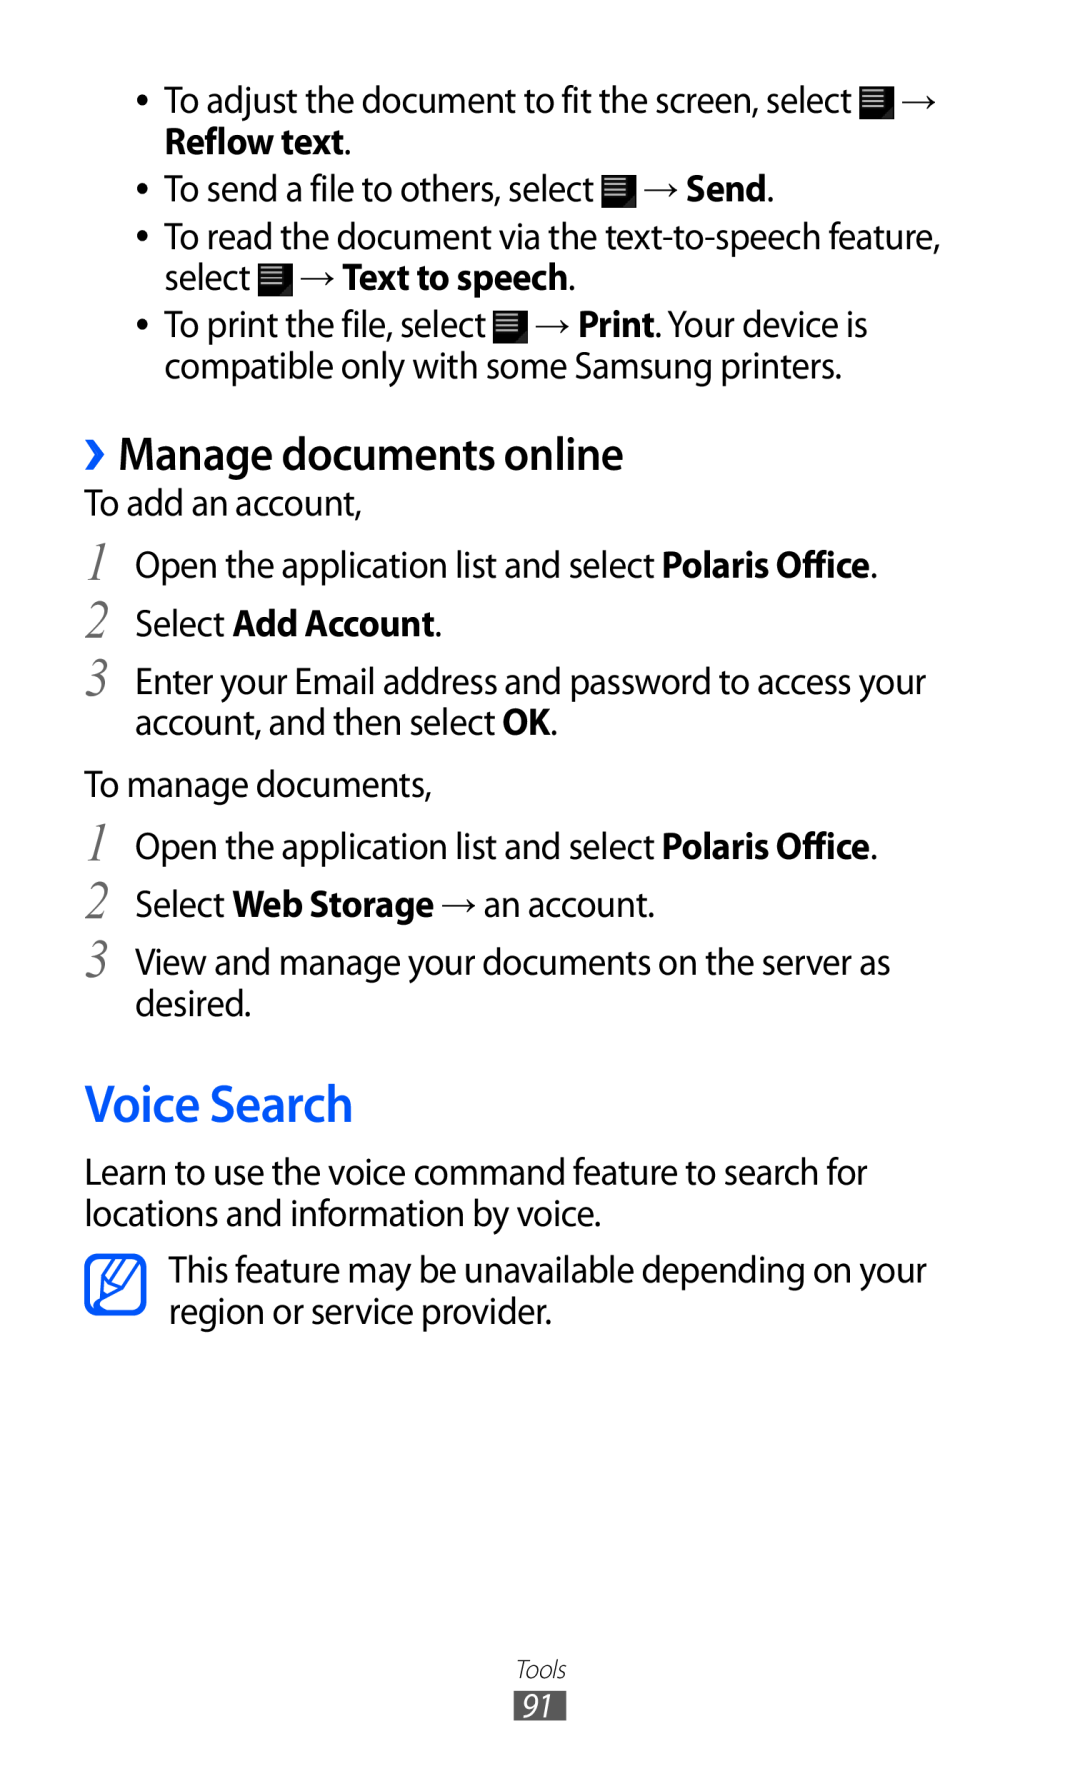 Samsung GT-P7310FKAXEF, GT-P7310FKEXEF, GT-P7310UWEXEF manual Voice Search, ››Manage documents online, Select Add Account 